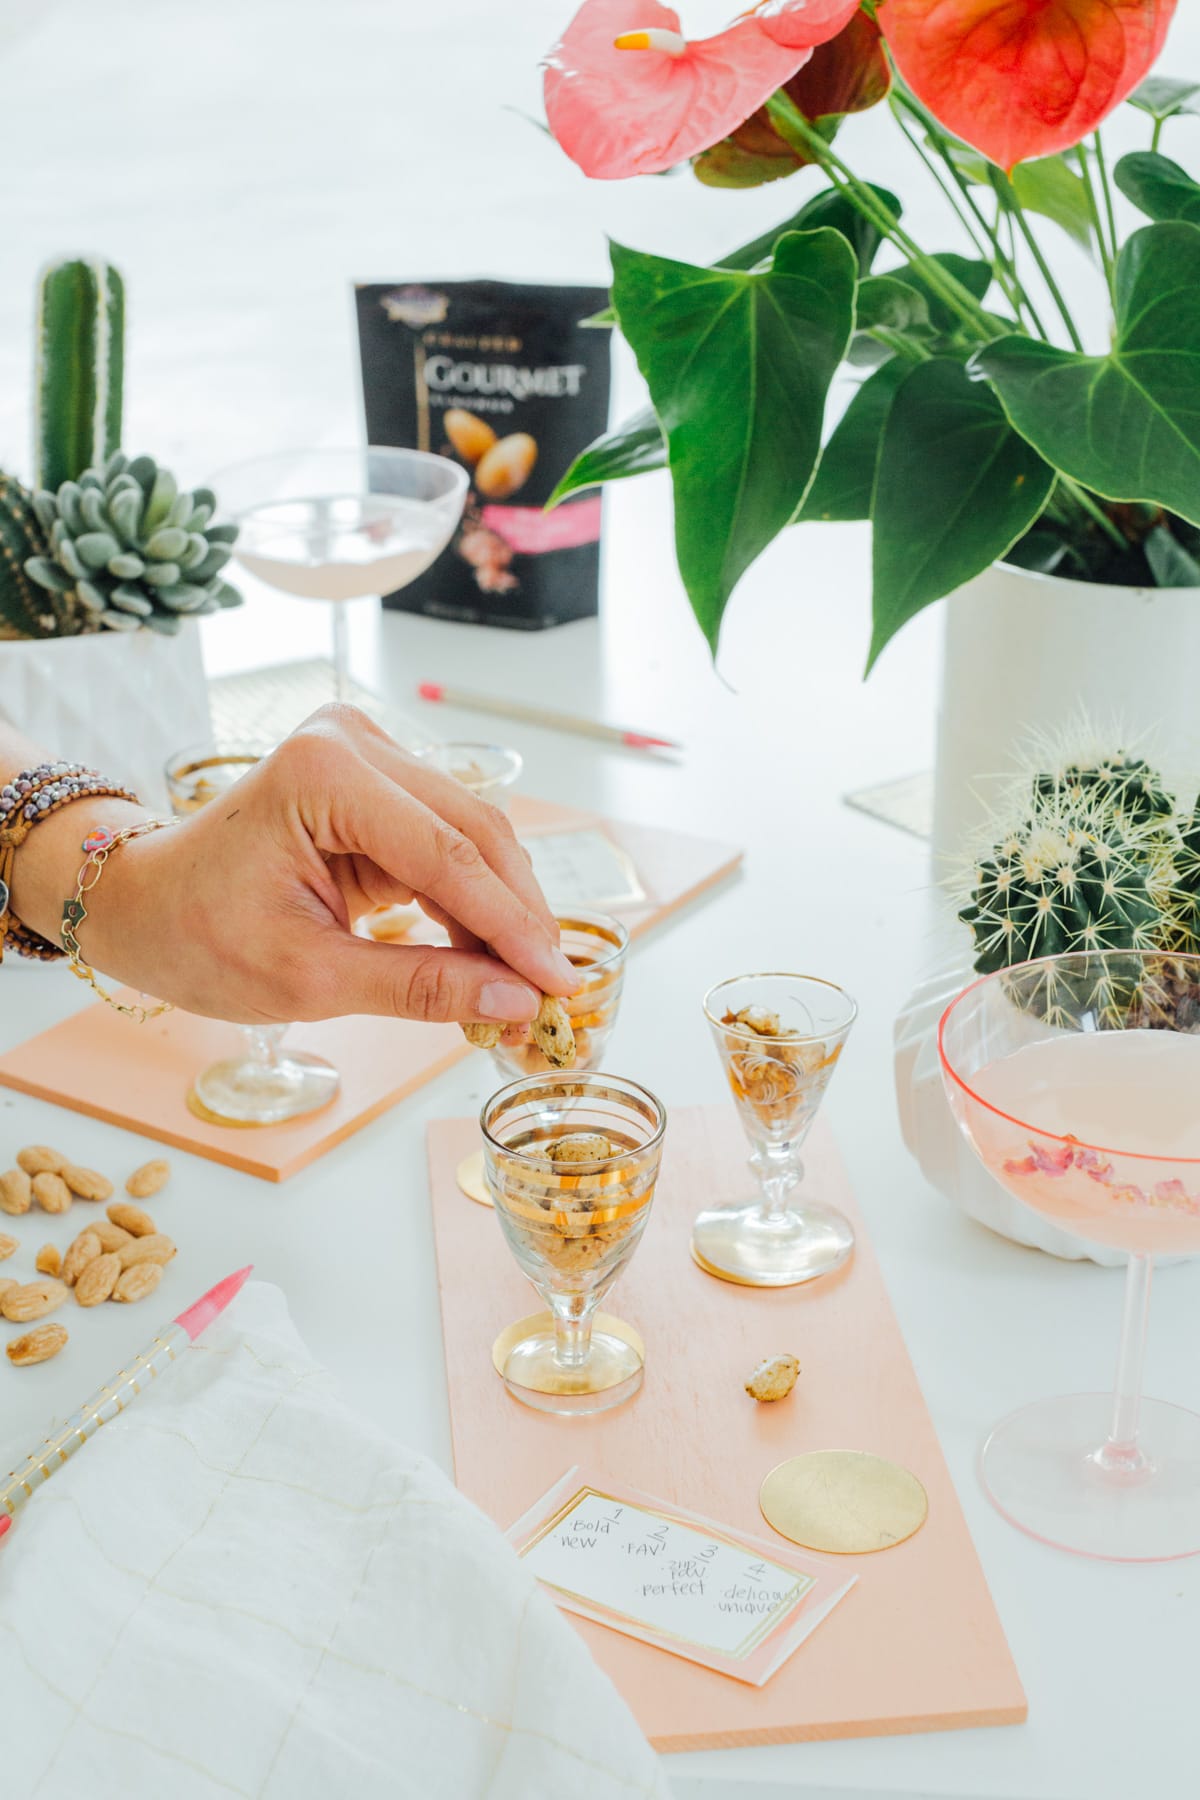 DIY Tasting Flight Boards by top Houston lifestyle blogger Ashley Rose of Sugar and Cloth #DIY #entertaining #almonds #appetizers #tastingflight